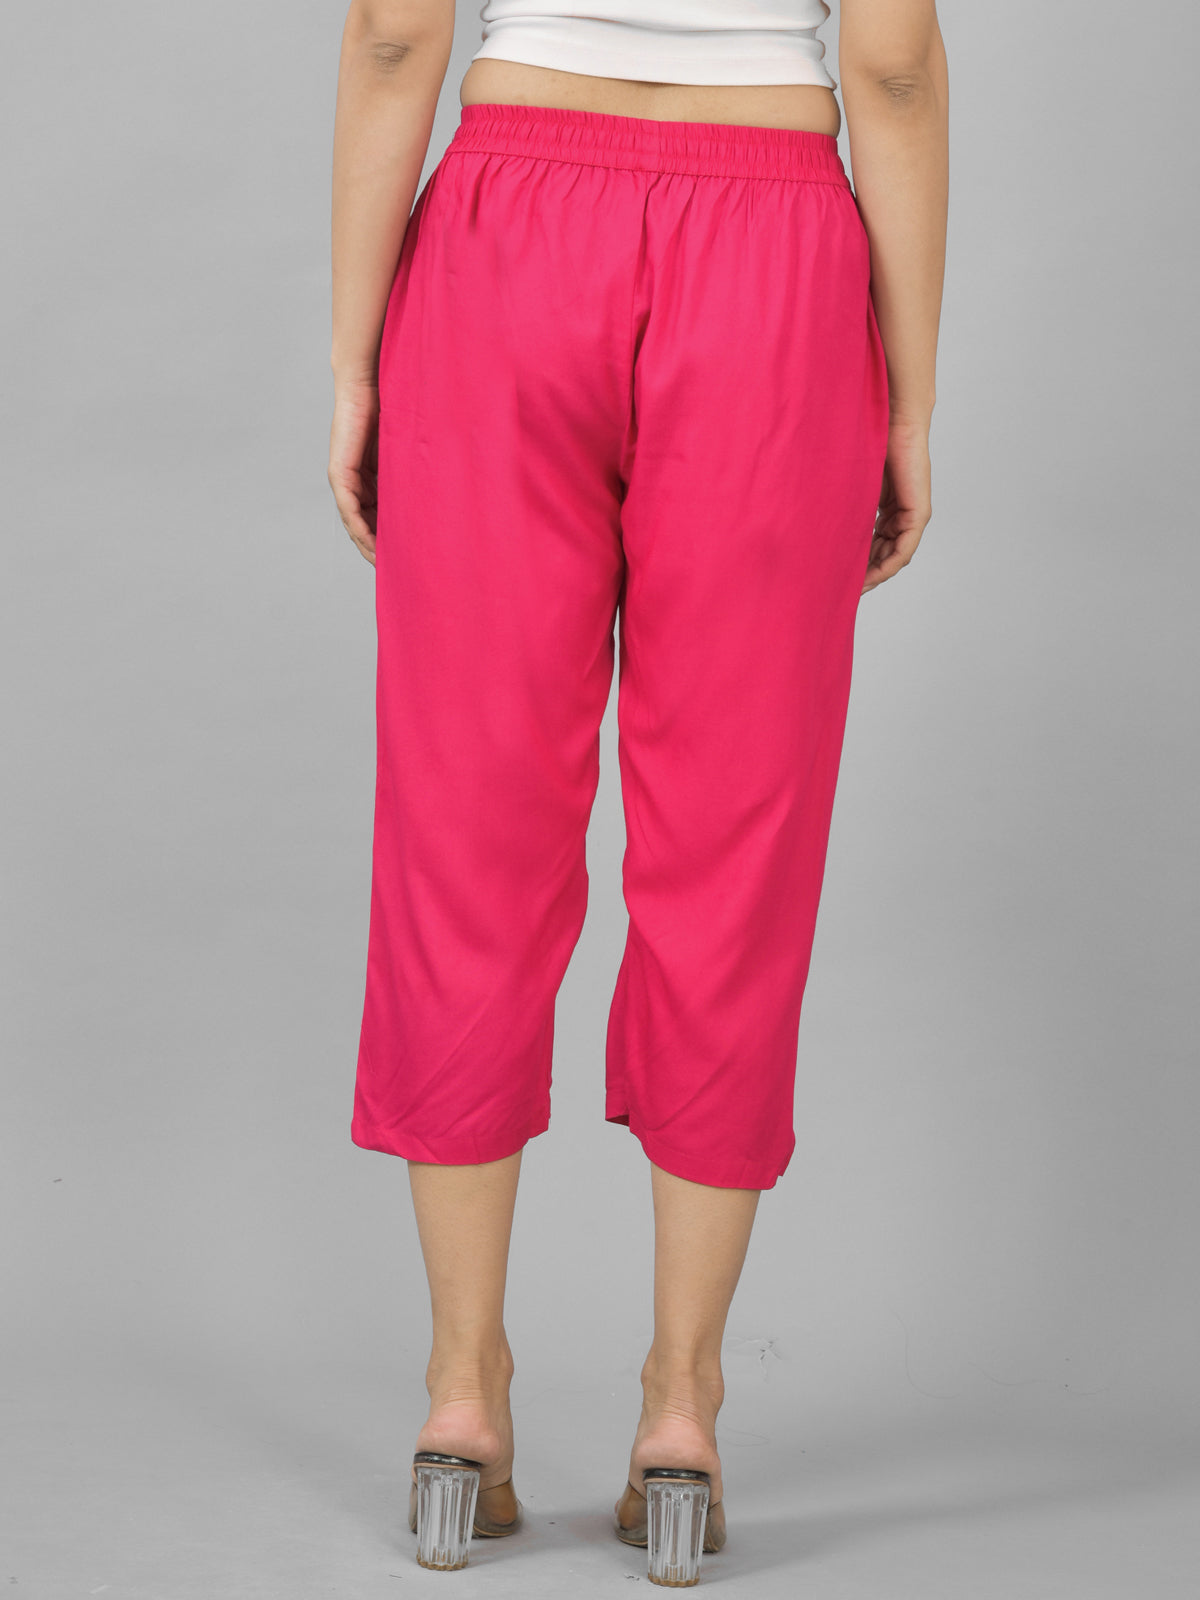 Pack Of 2 Women Rani Pink And White Calf Length Rayon Culottes Trouser Combo